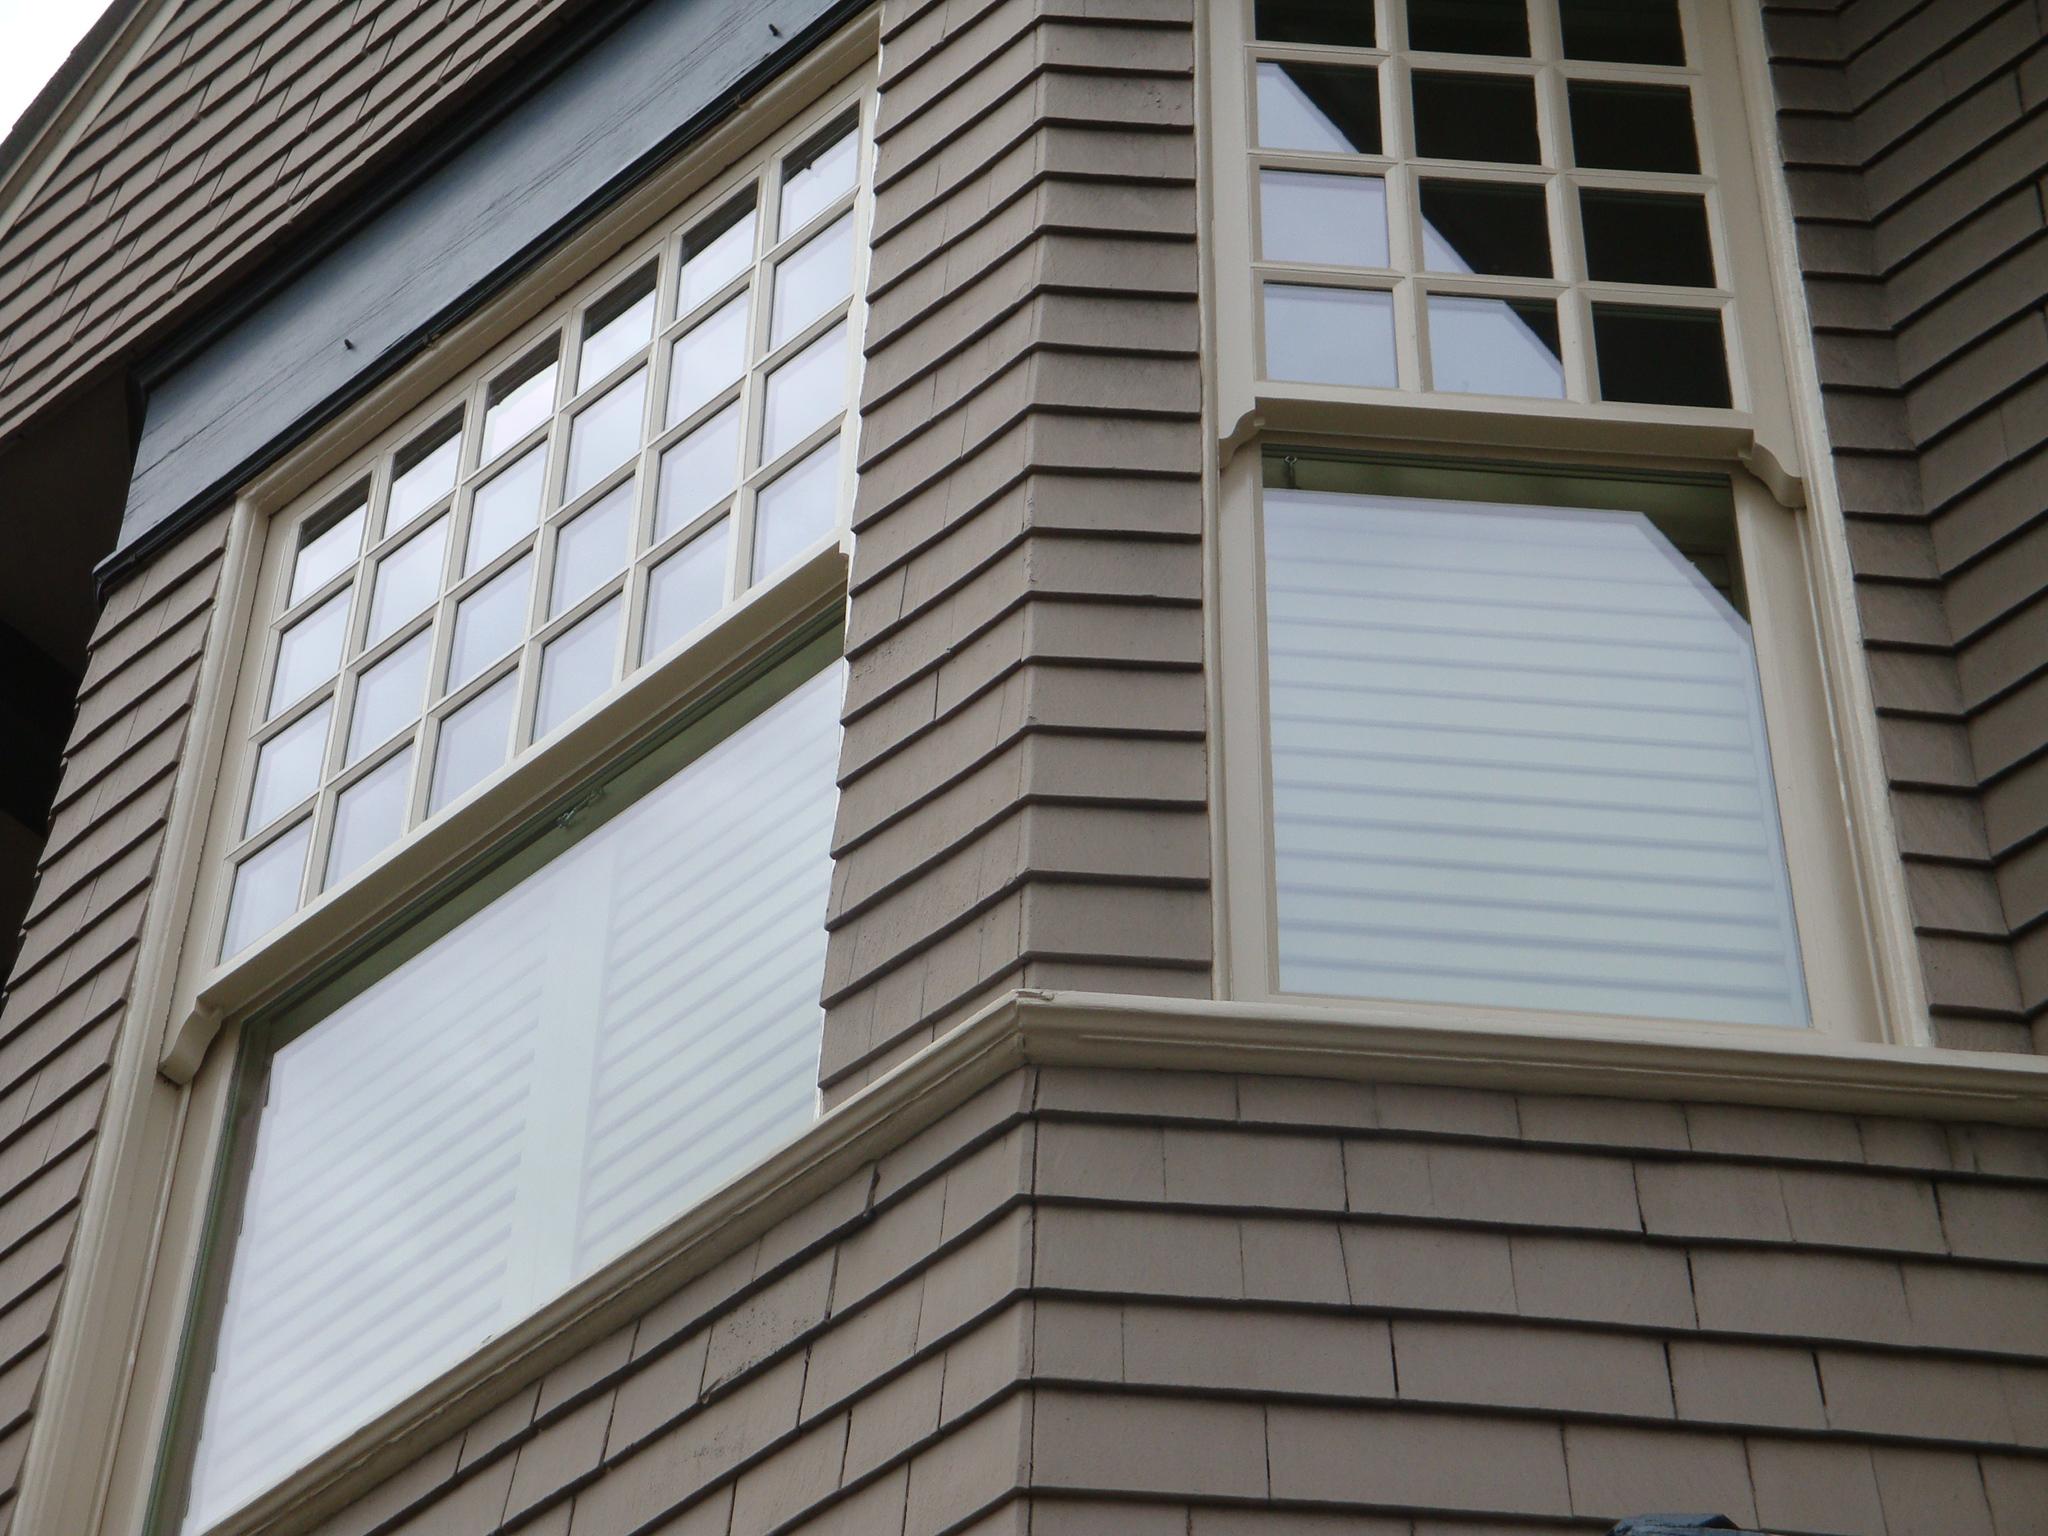 Picture of A close-up look at a new wood window installation project by Save Energy Company - Save Energy Company